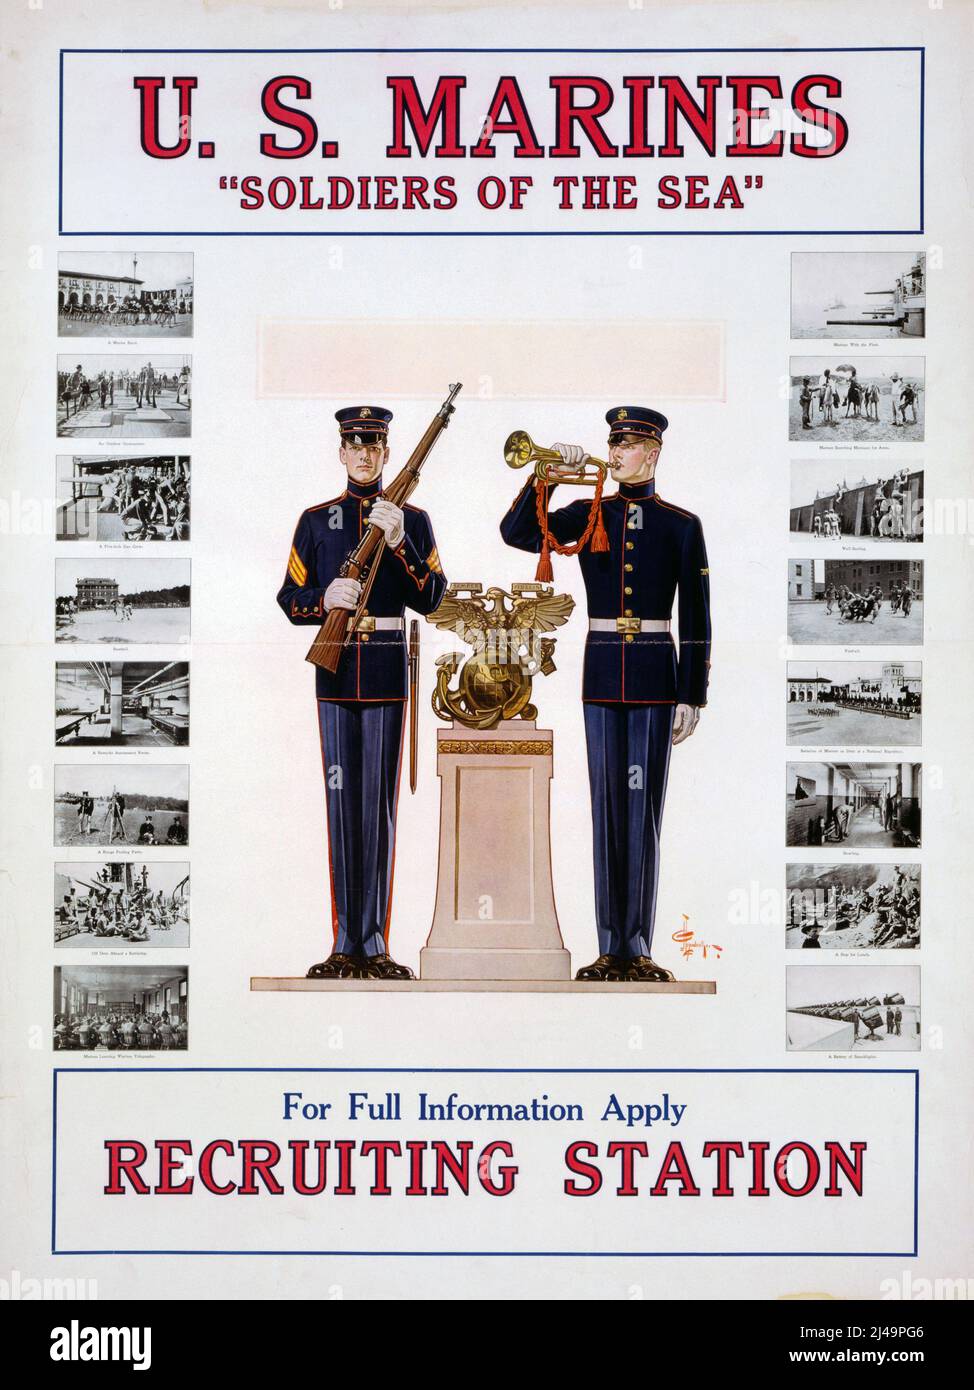 Poster design by JC Leyendecker - U.S. Marines ‘Soldiers of the sea’ (1917) Stock Photo